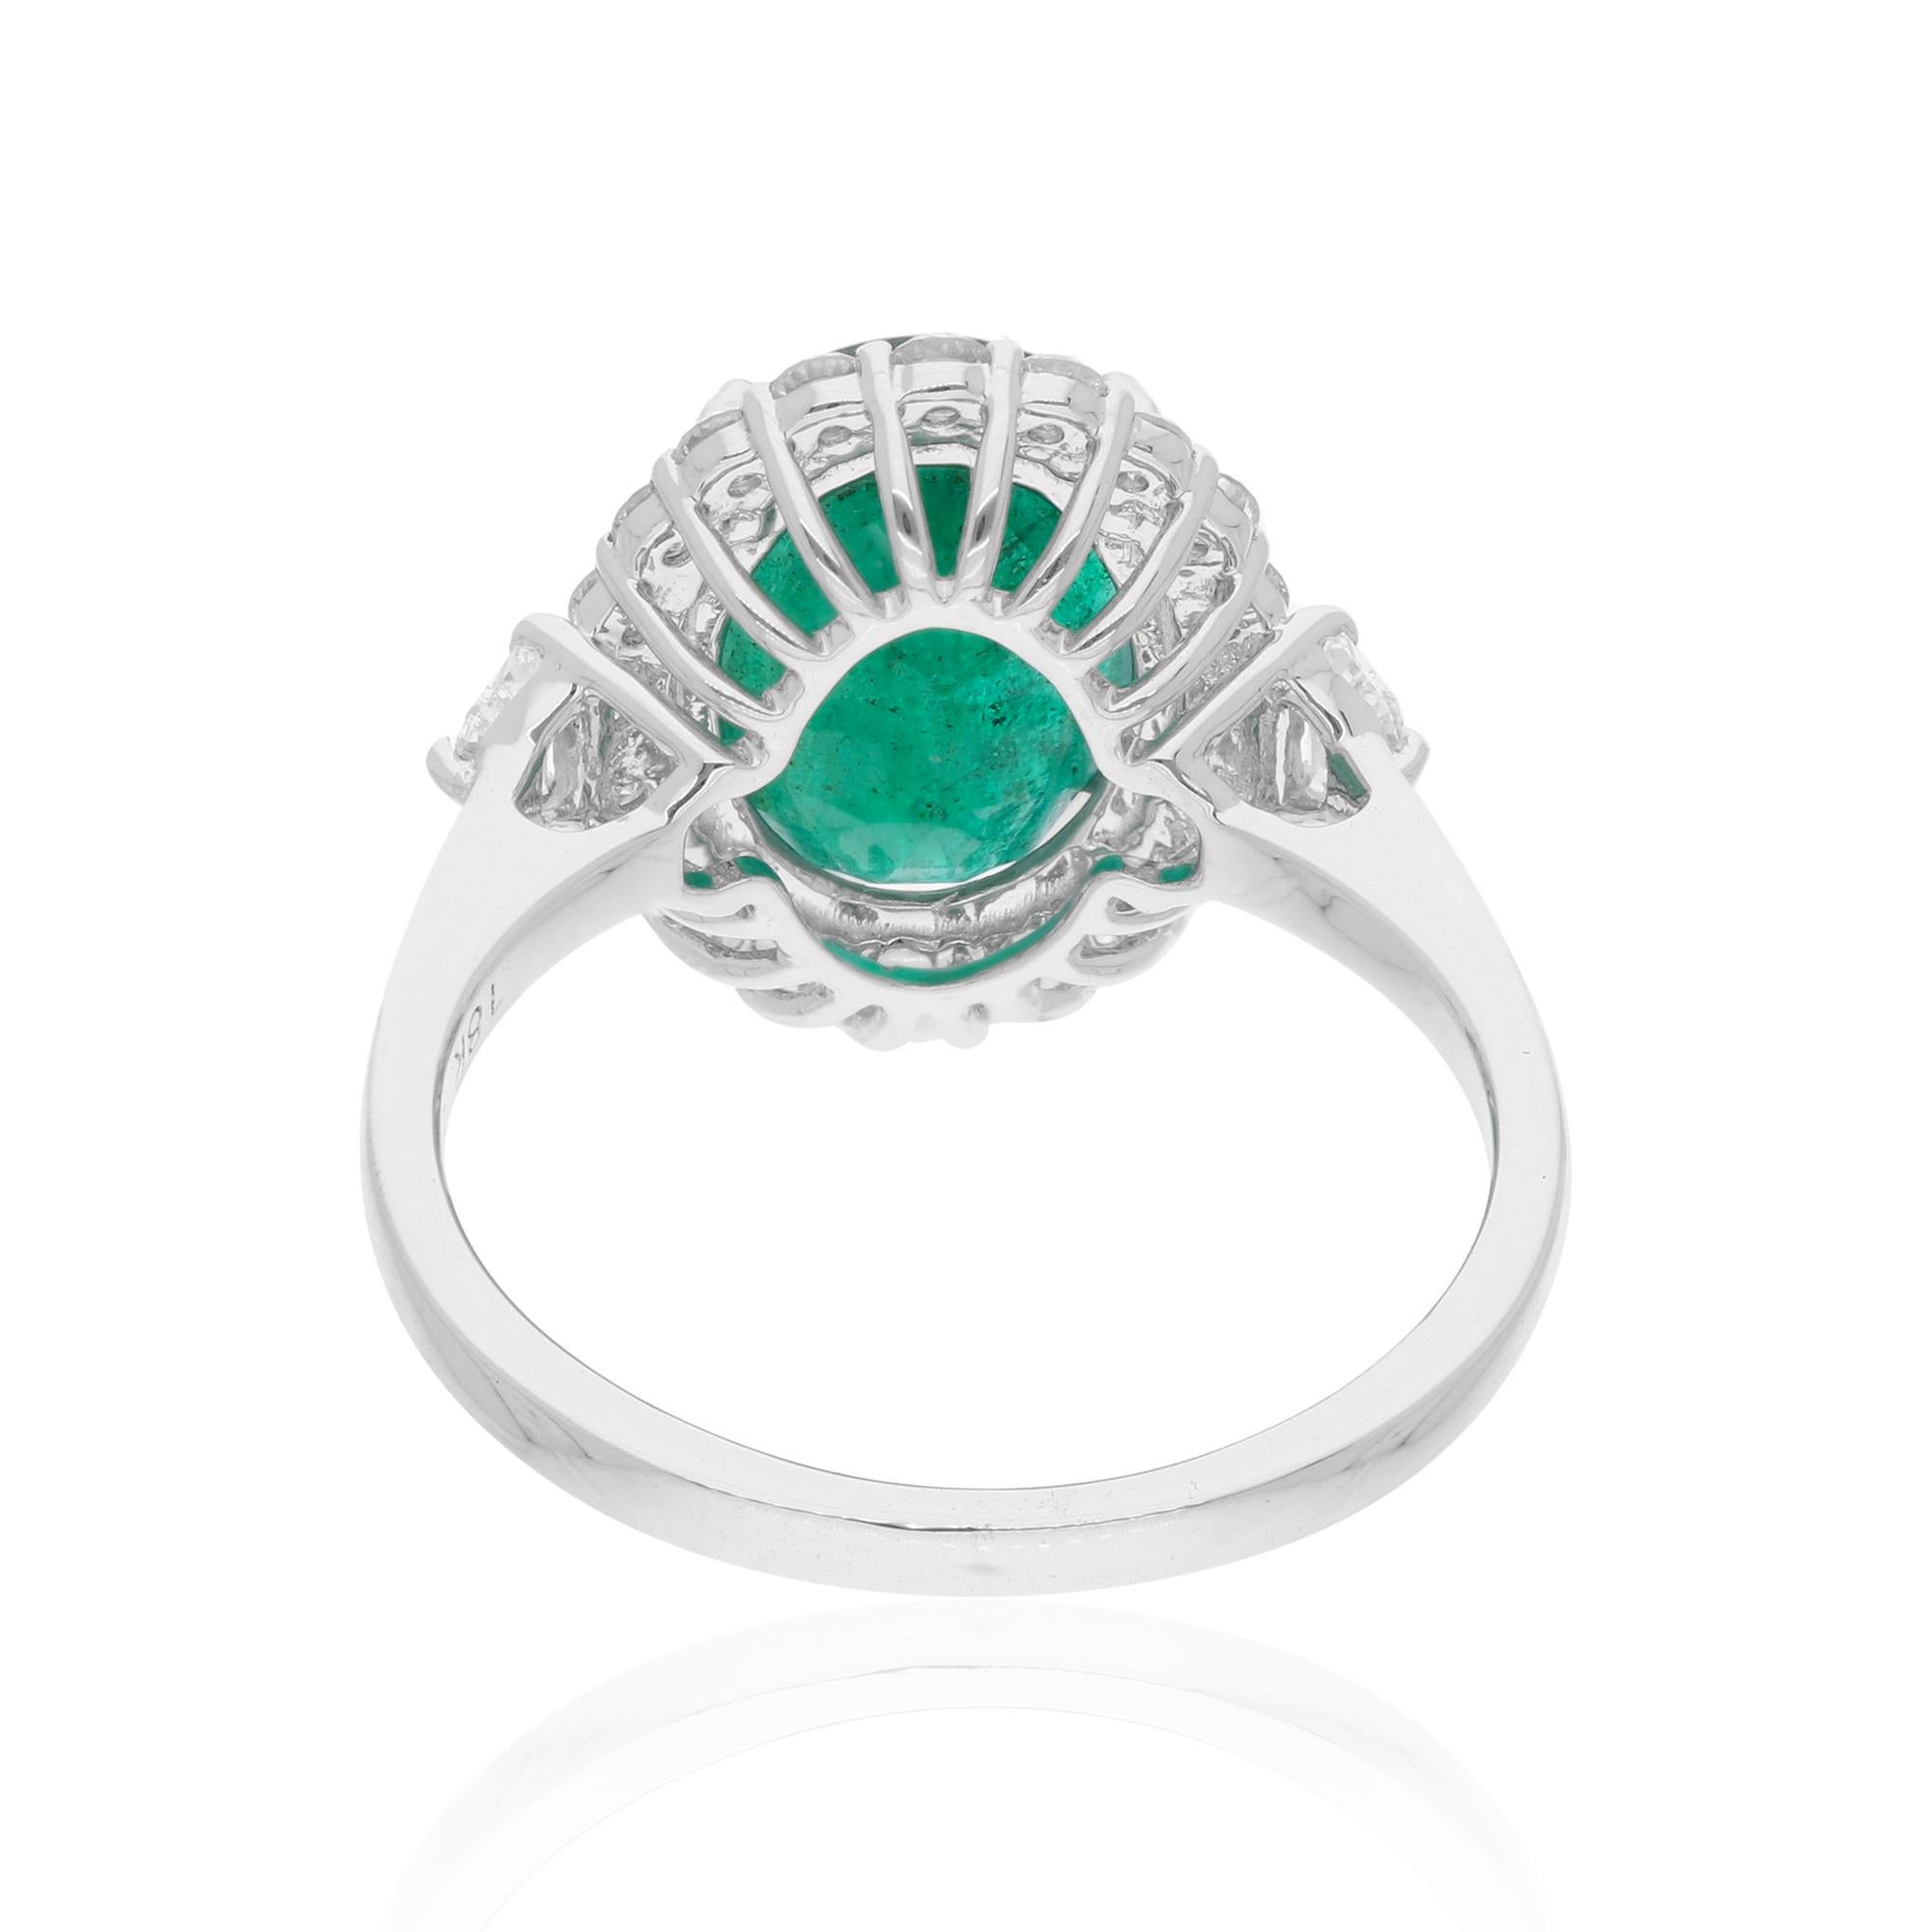 Indulge in the opulent allure of this Oval Shape Zambian Emerald Gemstone Cocktail Ring, elegantly set in 14 Karat White Gold. This exquisite piece exudes sophistication and timeless charm, perfect for those who appreciate the finer things in